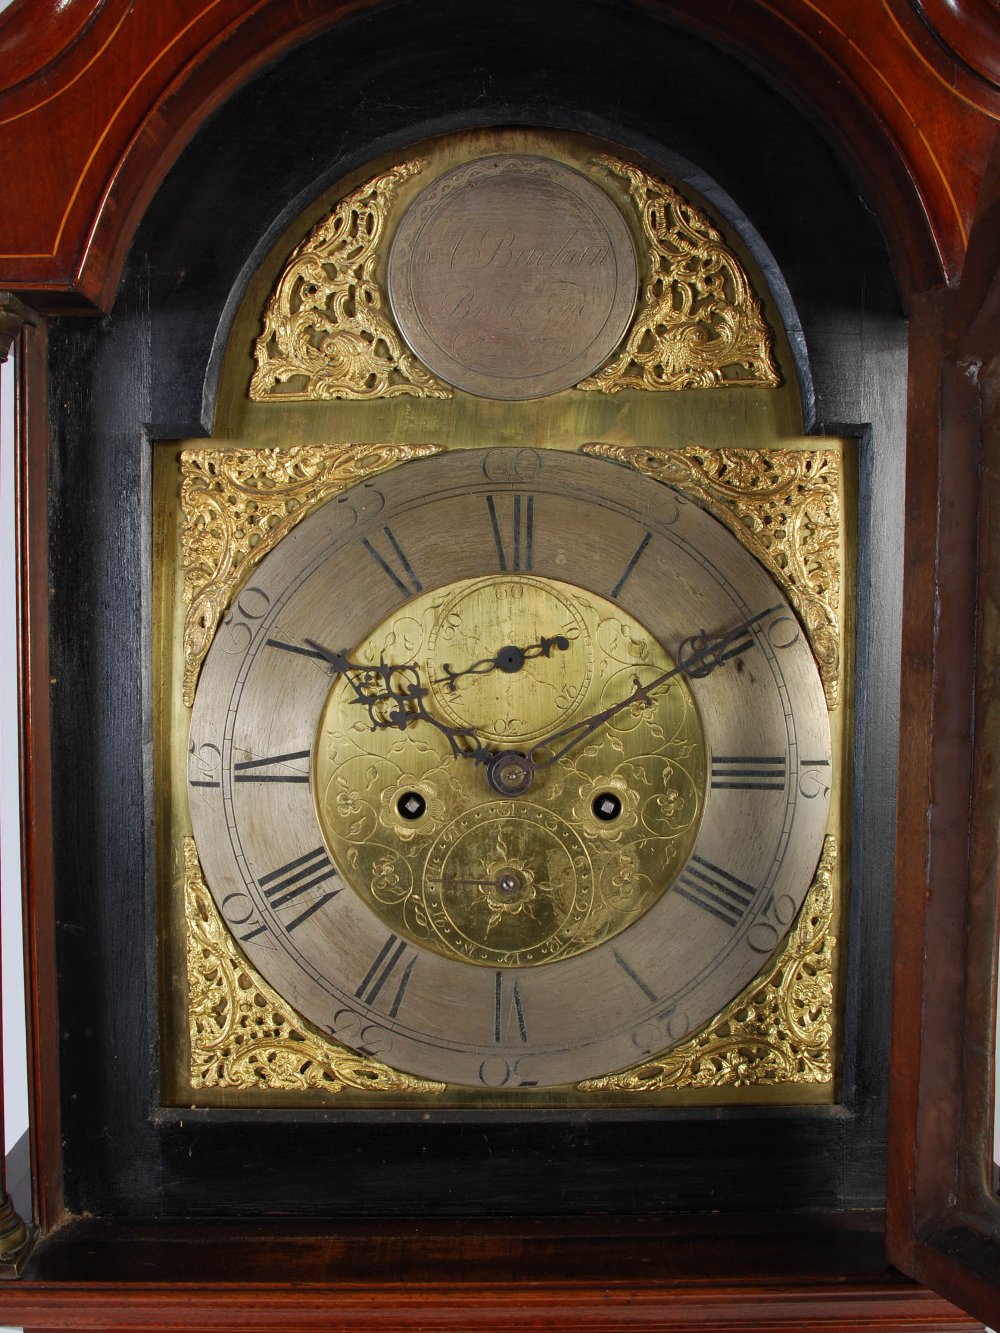 A Late 18th/ early 19th century mahogany and marquetry inlaid longcase clock, A. Buchan, Bridgend, - Image 3 of 9